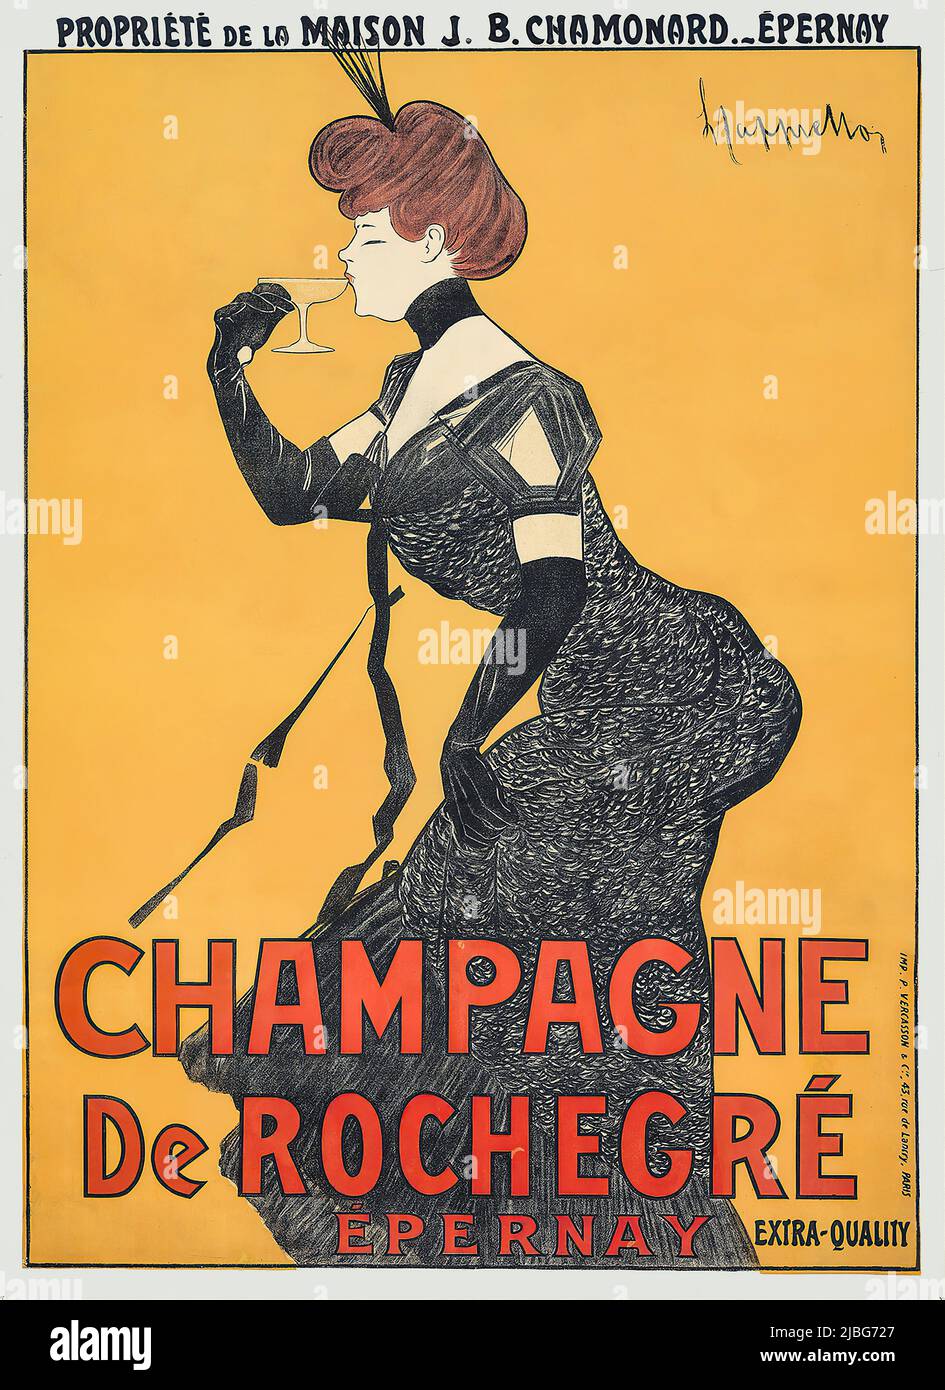 A turn of the 20th century advertising poster by Leonetto Cappiello (1875-1942) for Champagne de Rochegre showing a woman sampling the drink from a champagne glass. Stock Photo